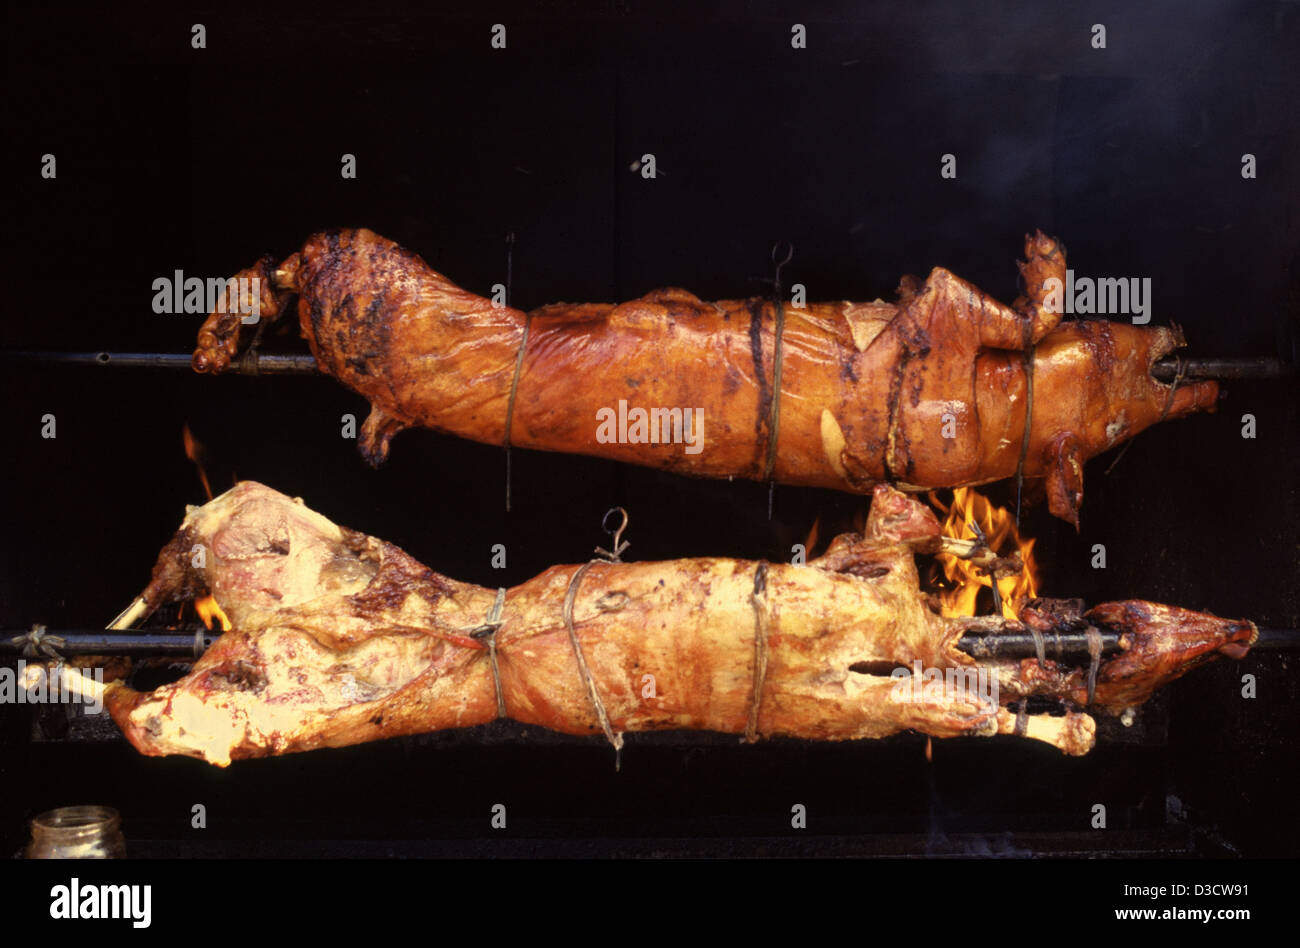 Slow-roasting pigs on a rotisserie cooking in a restaurant at the Adriatic coast Croatia Stock Photo